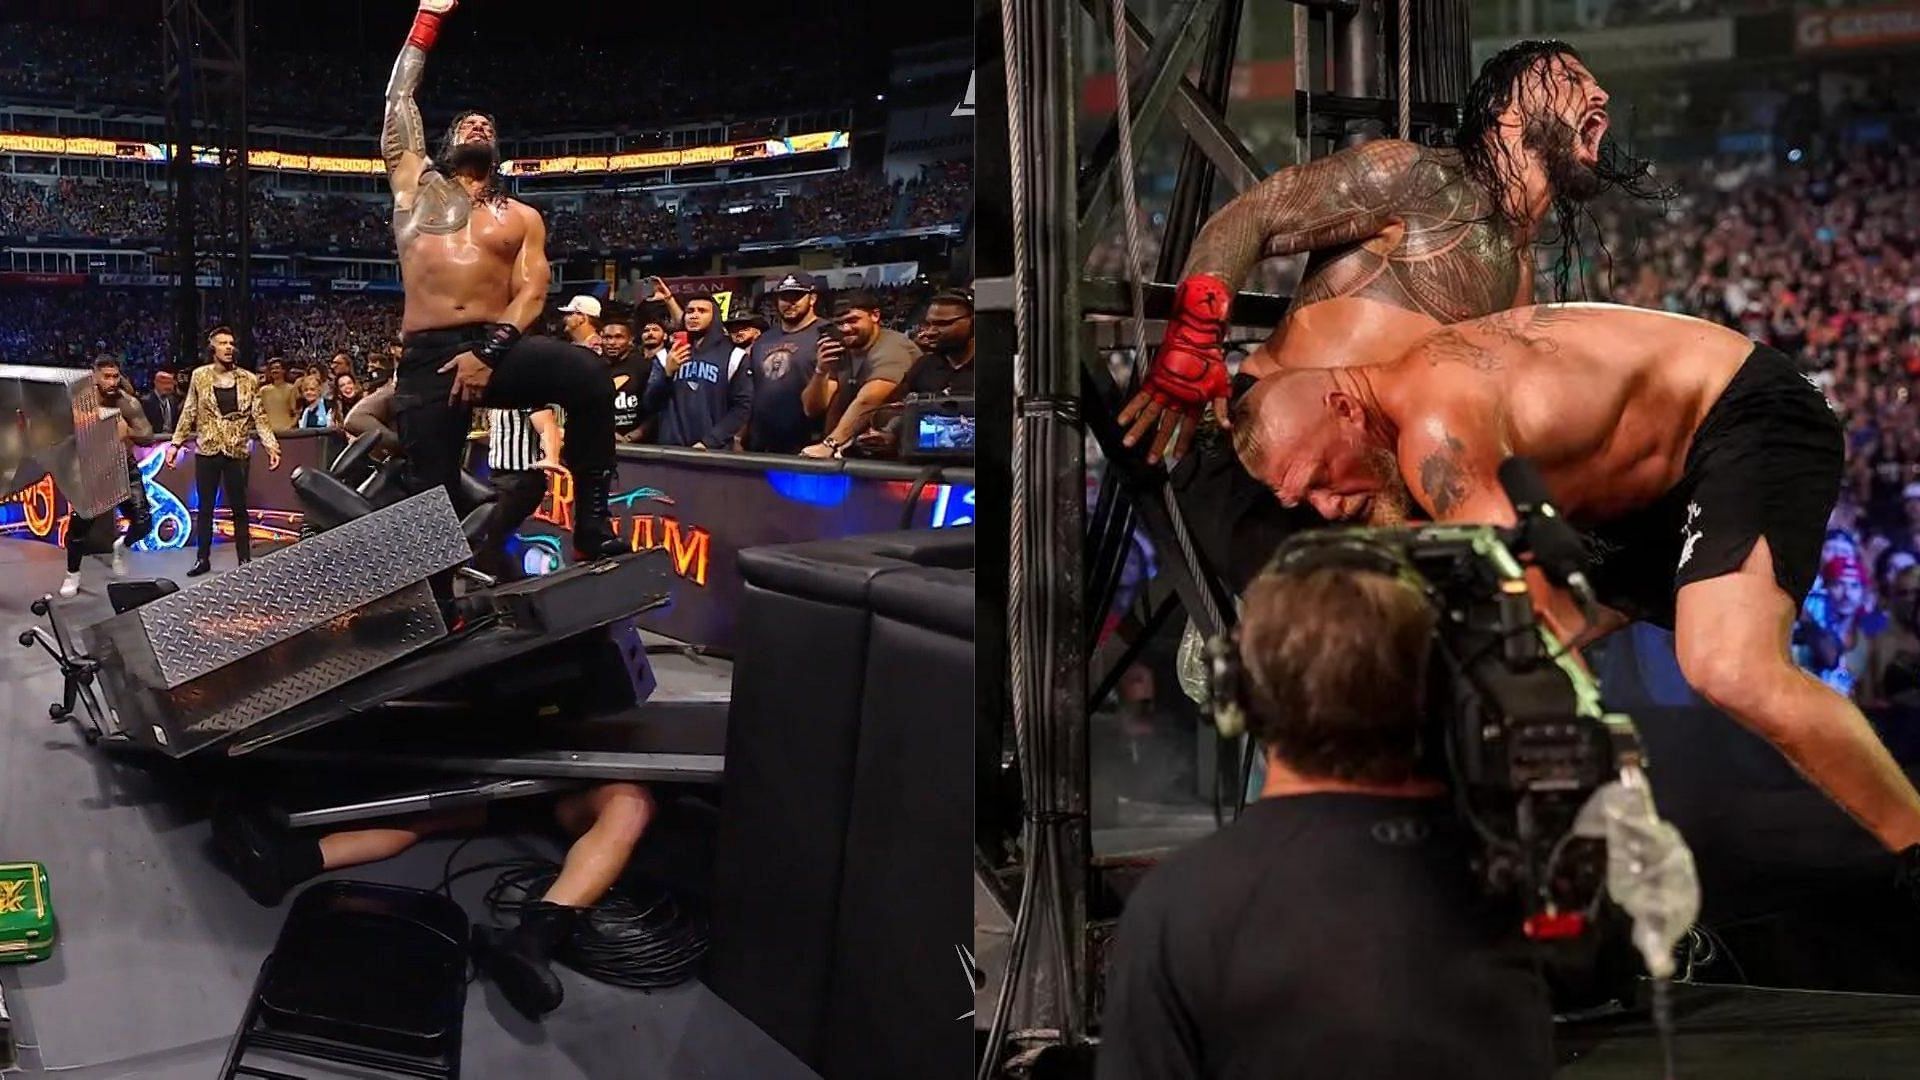 Roman Reigns was victorious over Brock Lesnar at SummerSlam